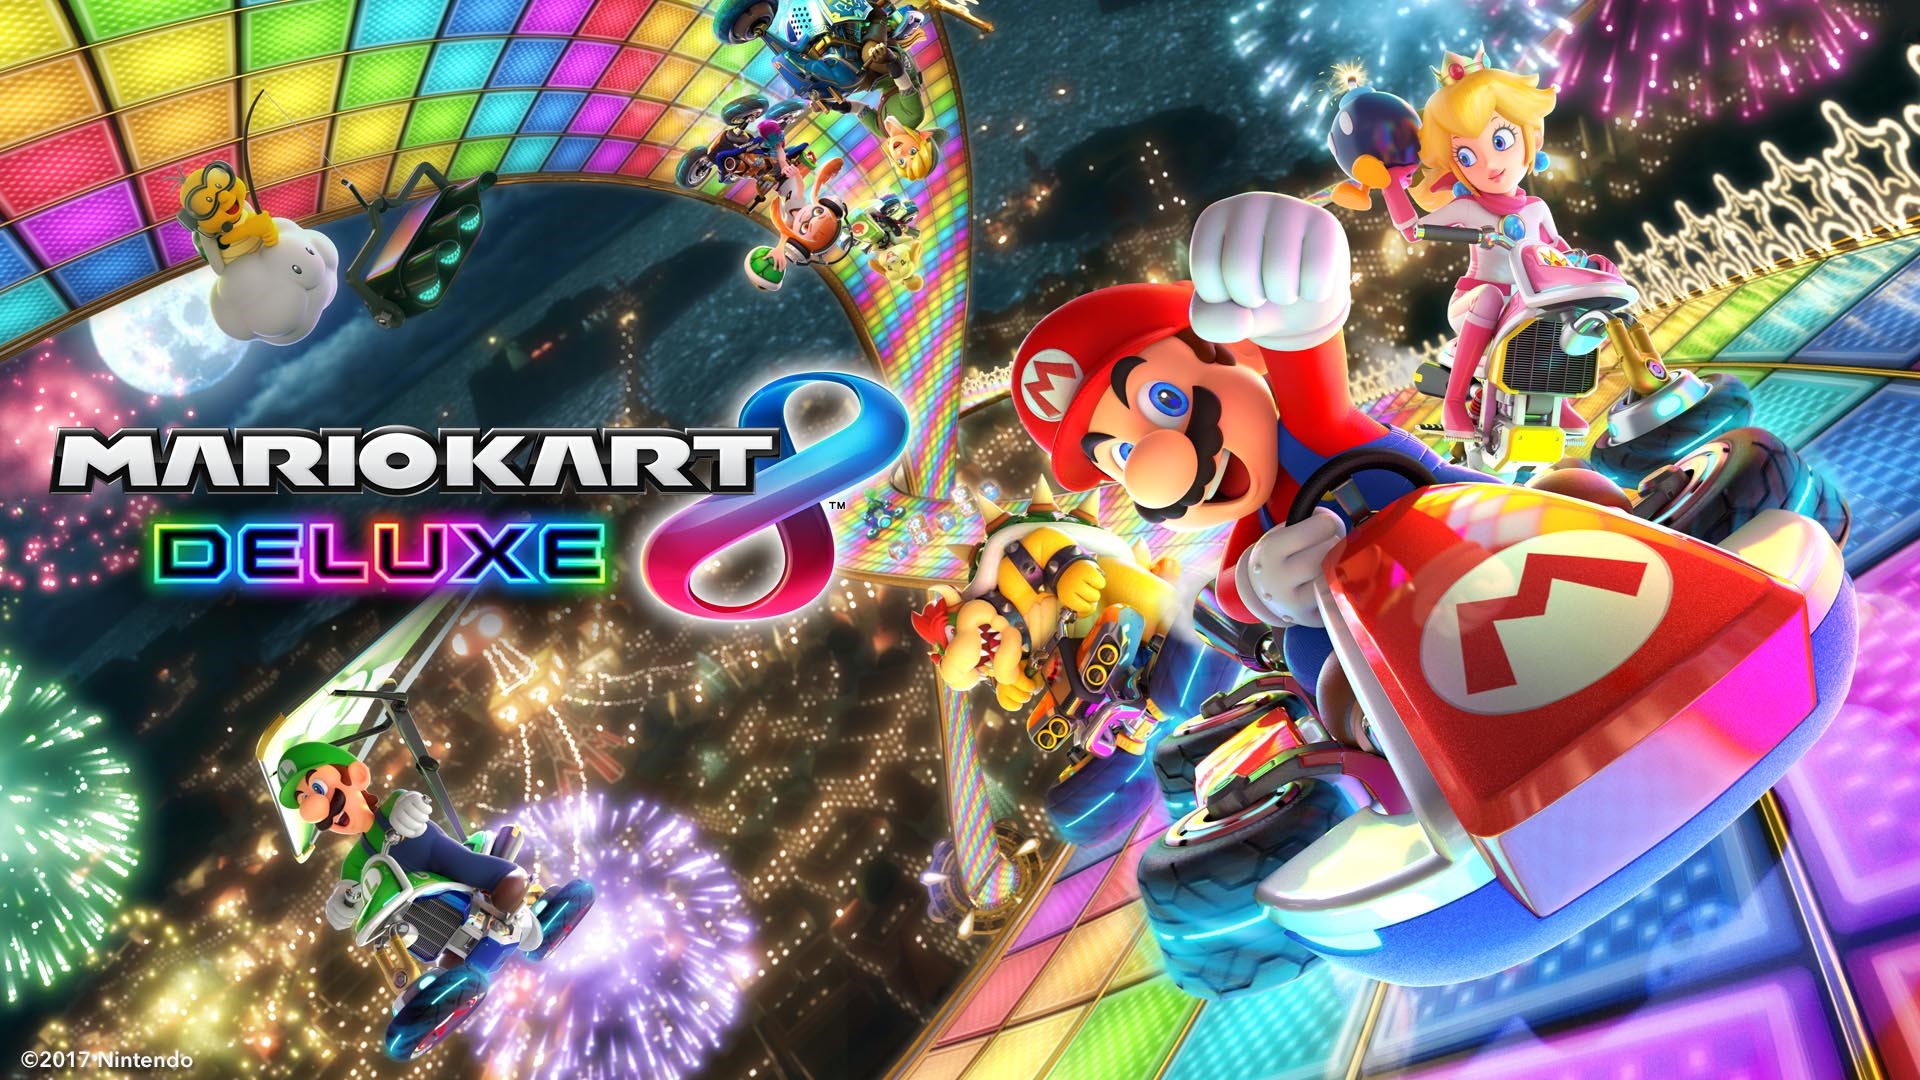 The number of copies of Mario Kart 8 Deluxe sold is approaching 62 million